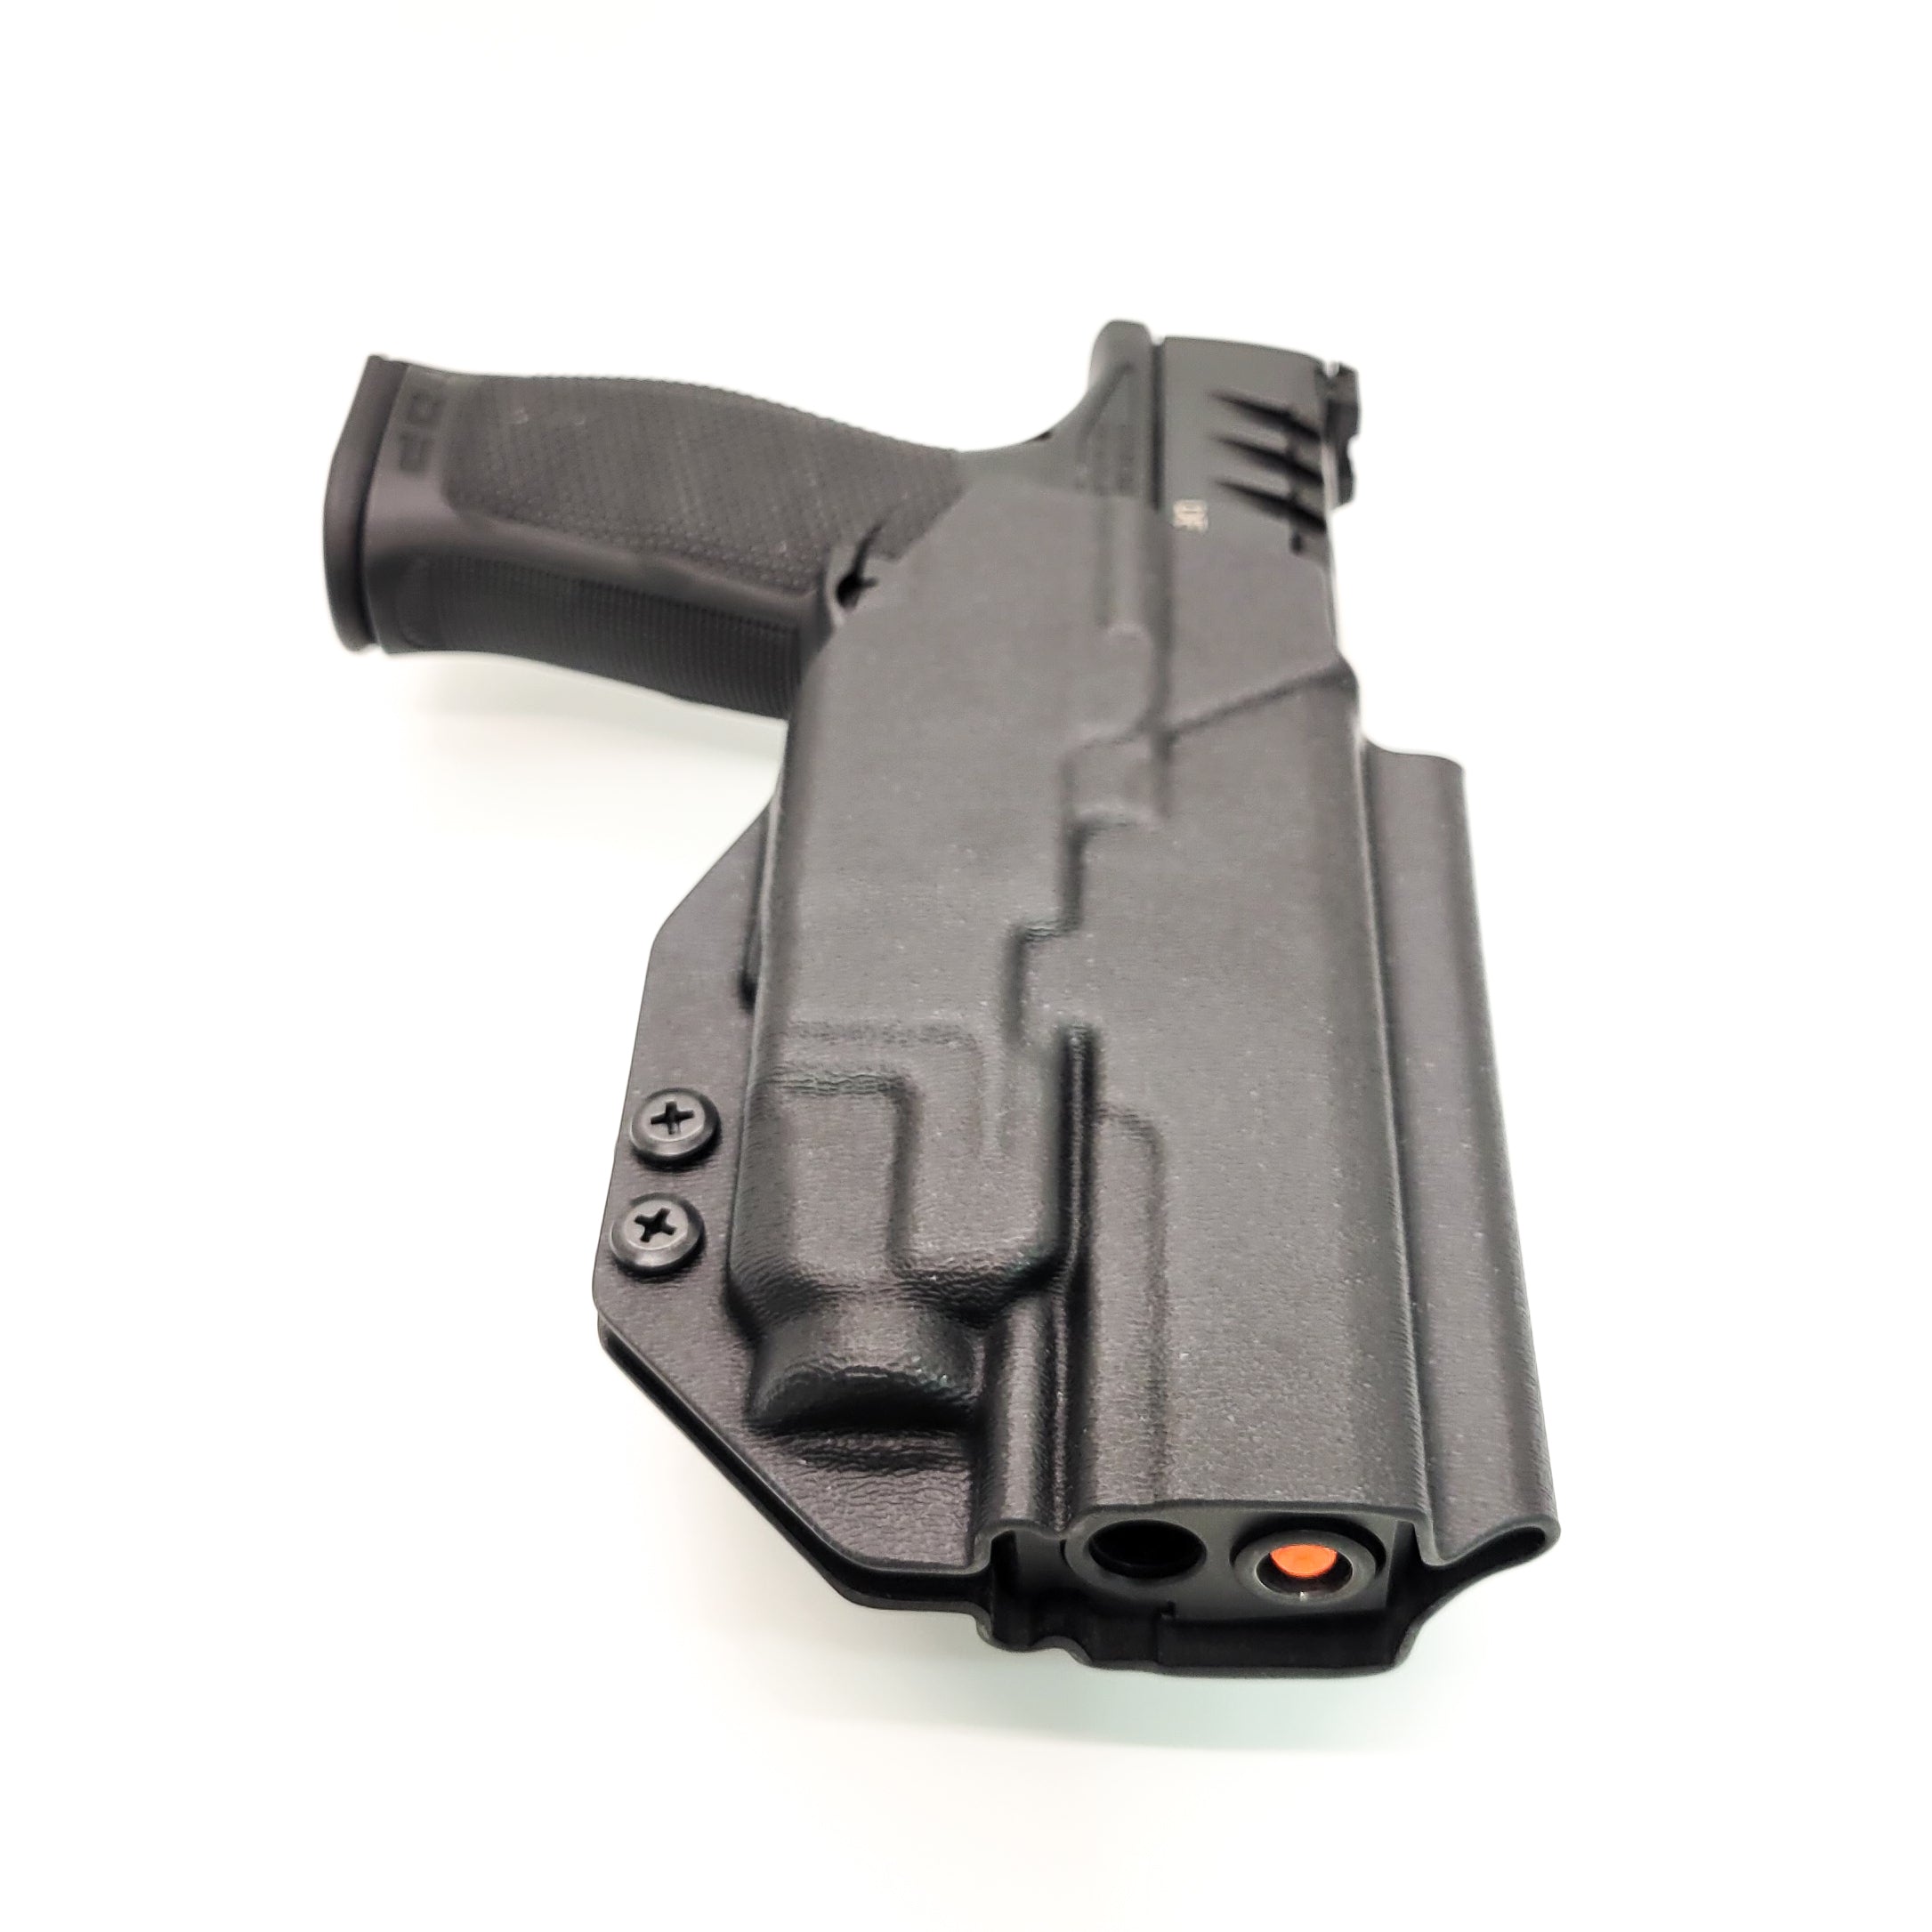 For the best Outside Waistband Taco Style Holster designed to fit the Walther PDP Pro SD Compact 4" pistol with the Streamlight TLR-7A or TLR-7 mounted on the firearm, shop Four Brothers Holsters. Cut for red dot sight, full sweat guard, adjustable retention & open muzzle for threaded barrels & compensators. 